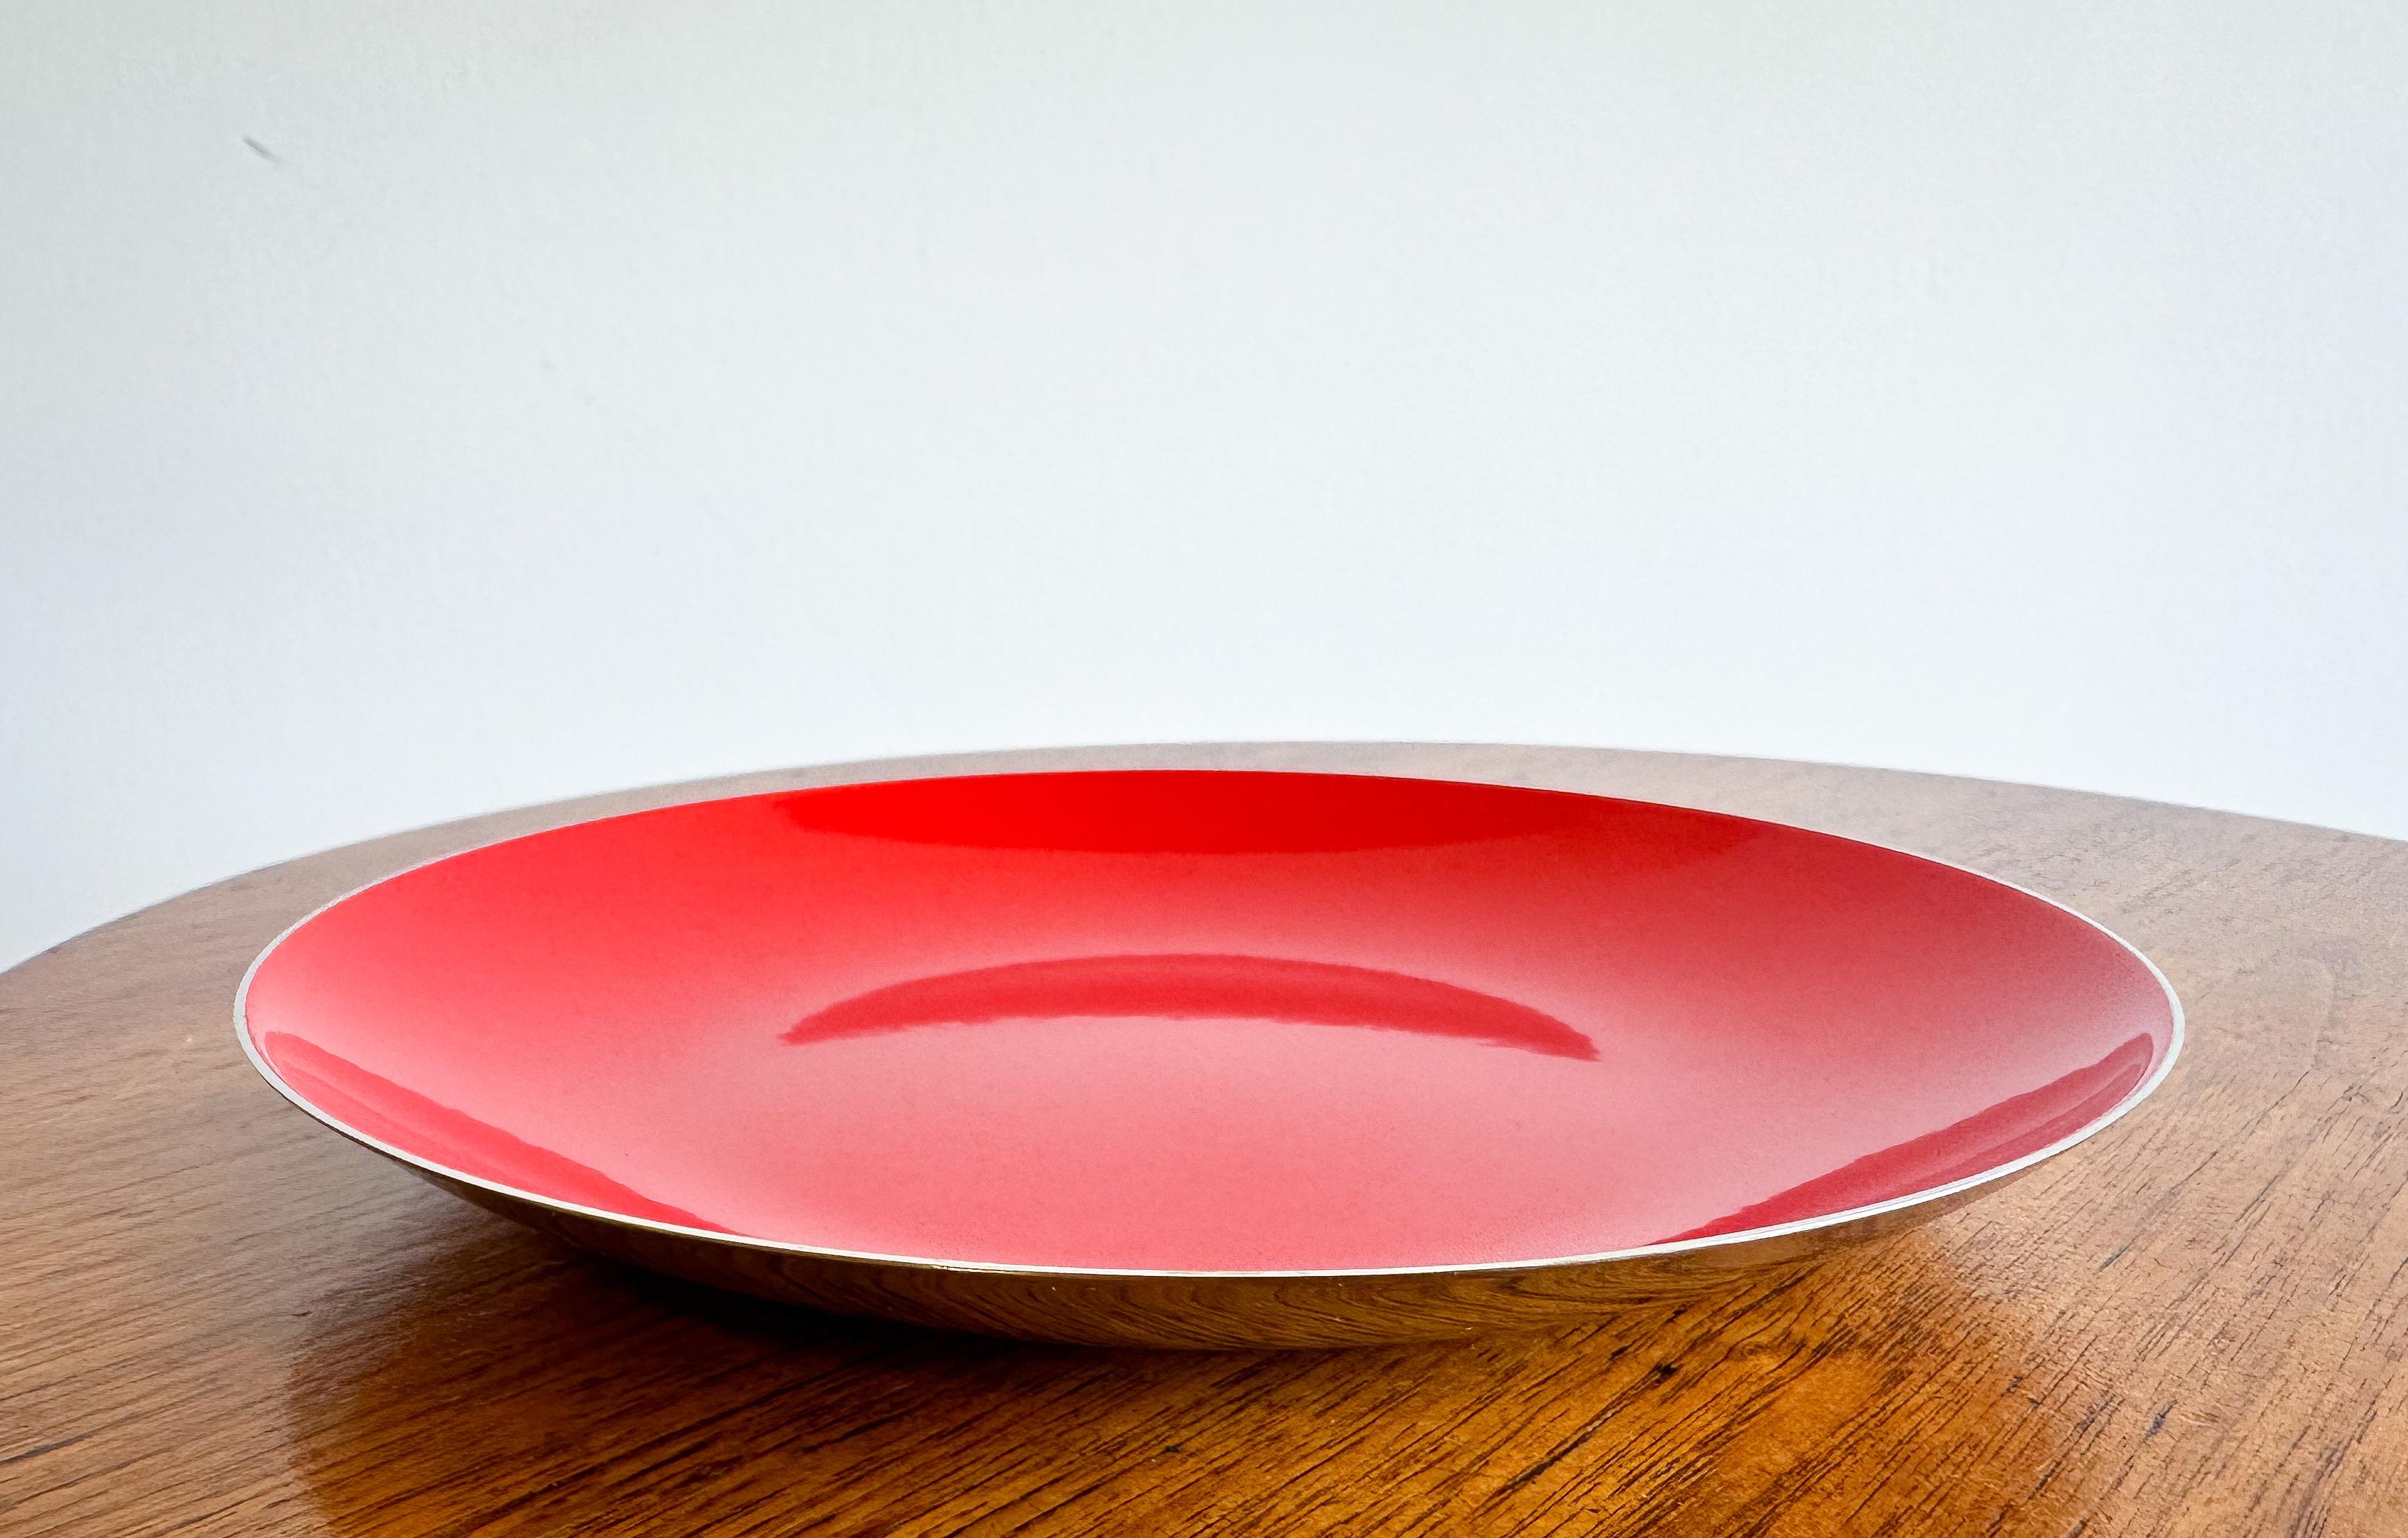 A red enameled stainless steel decorative dish/bowl produced by Leif Wessman Associates of Norway. Distributed by Knoll International.

Use anywhere for a fun pop of color.